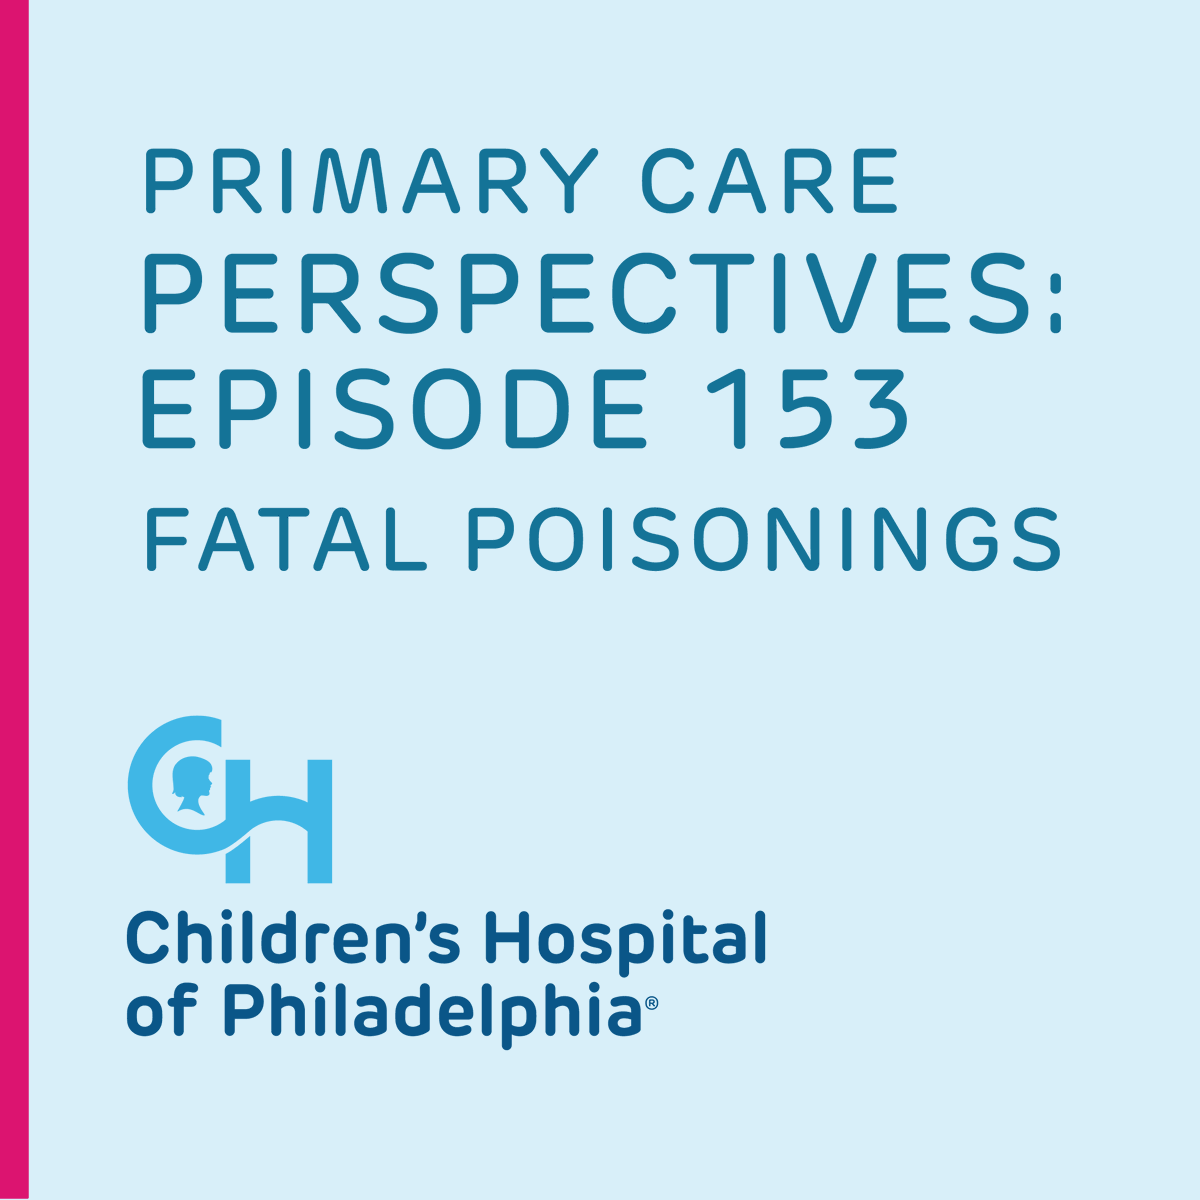 In this #podcast episode of Primary Care Perspectives, Dr. Katie Lockwood talks with Dr. Christopher E. Gaw from Nationwide Children’s Hospital about the latest findings from his recent study on fatal poisonings among young children. Listen here: ms.spr.ly/60199eVt7.